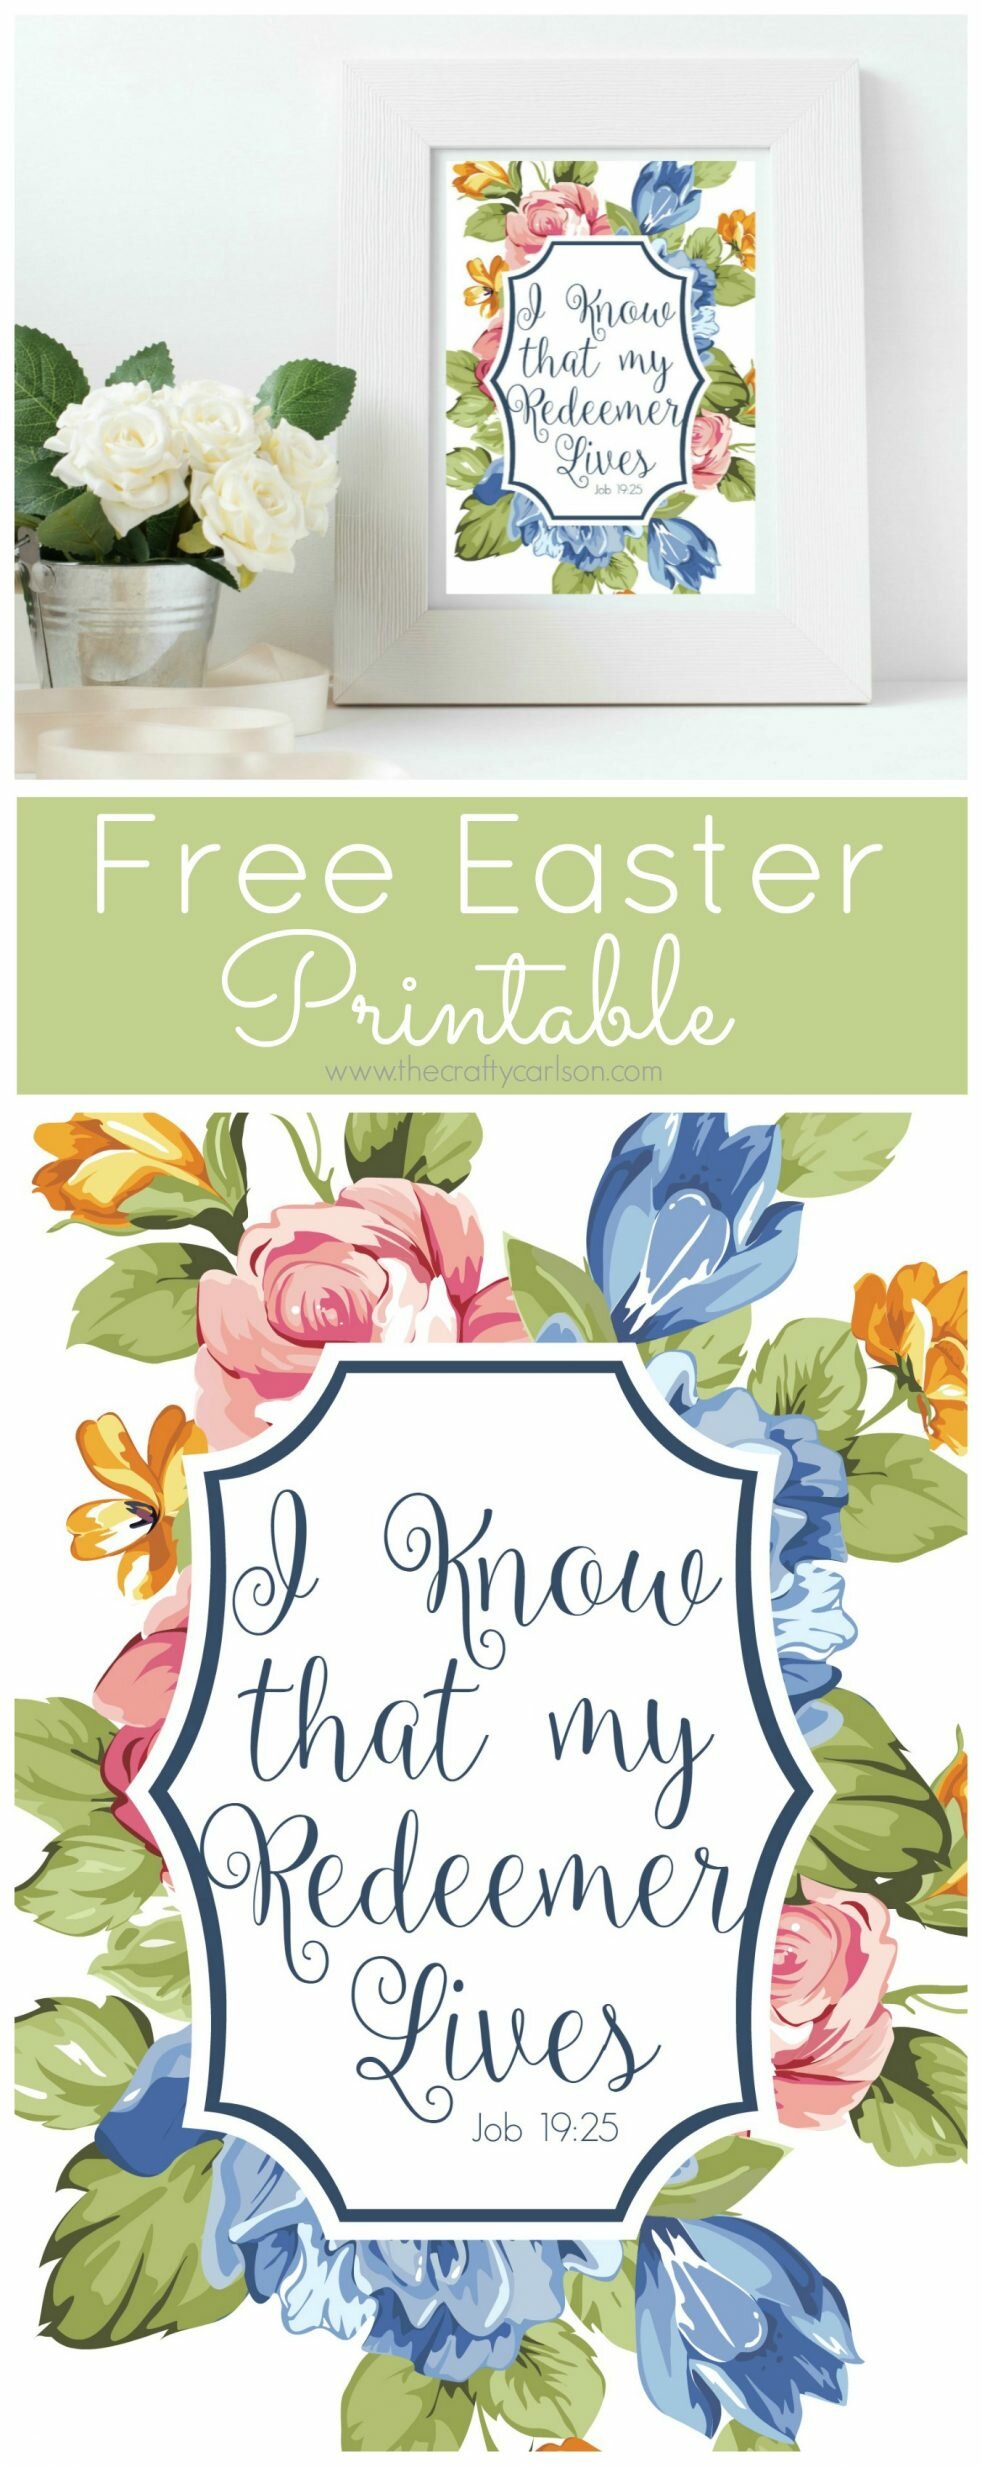 free easter printable featured image